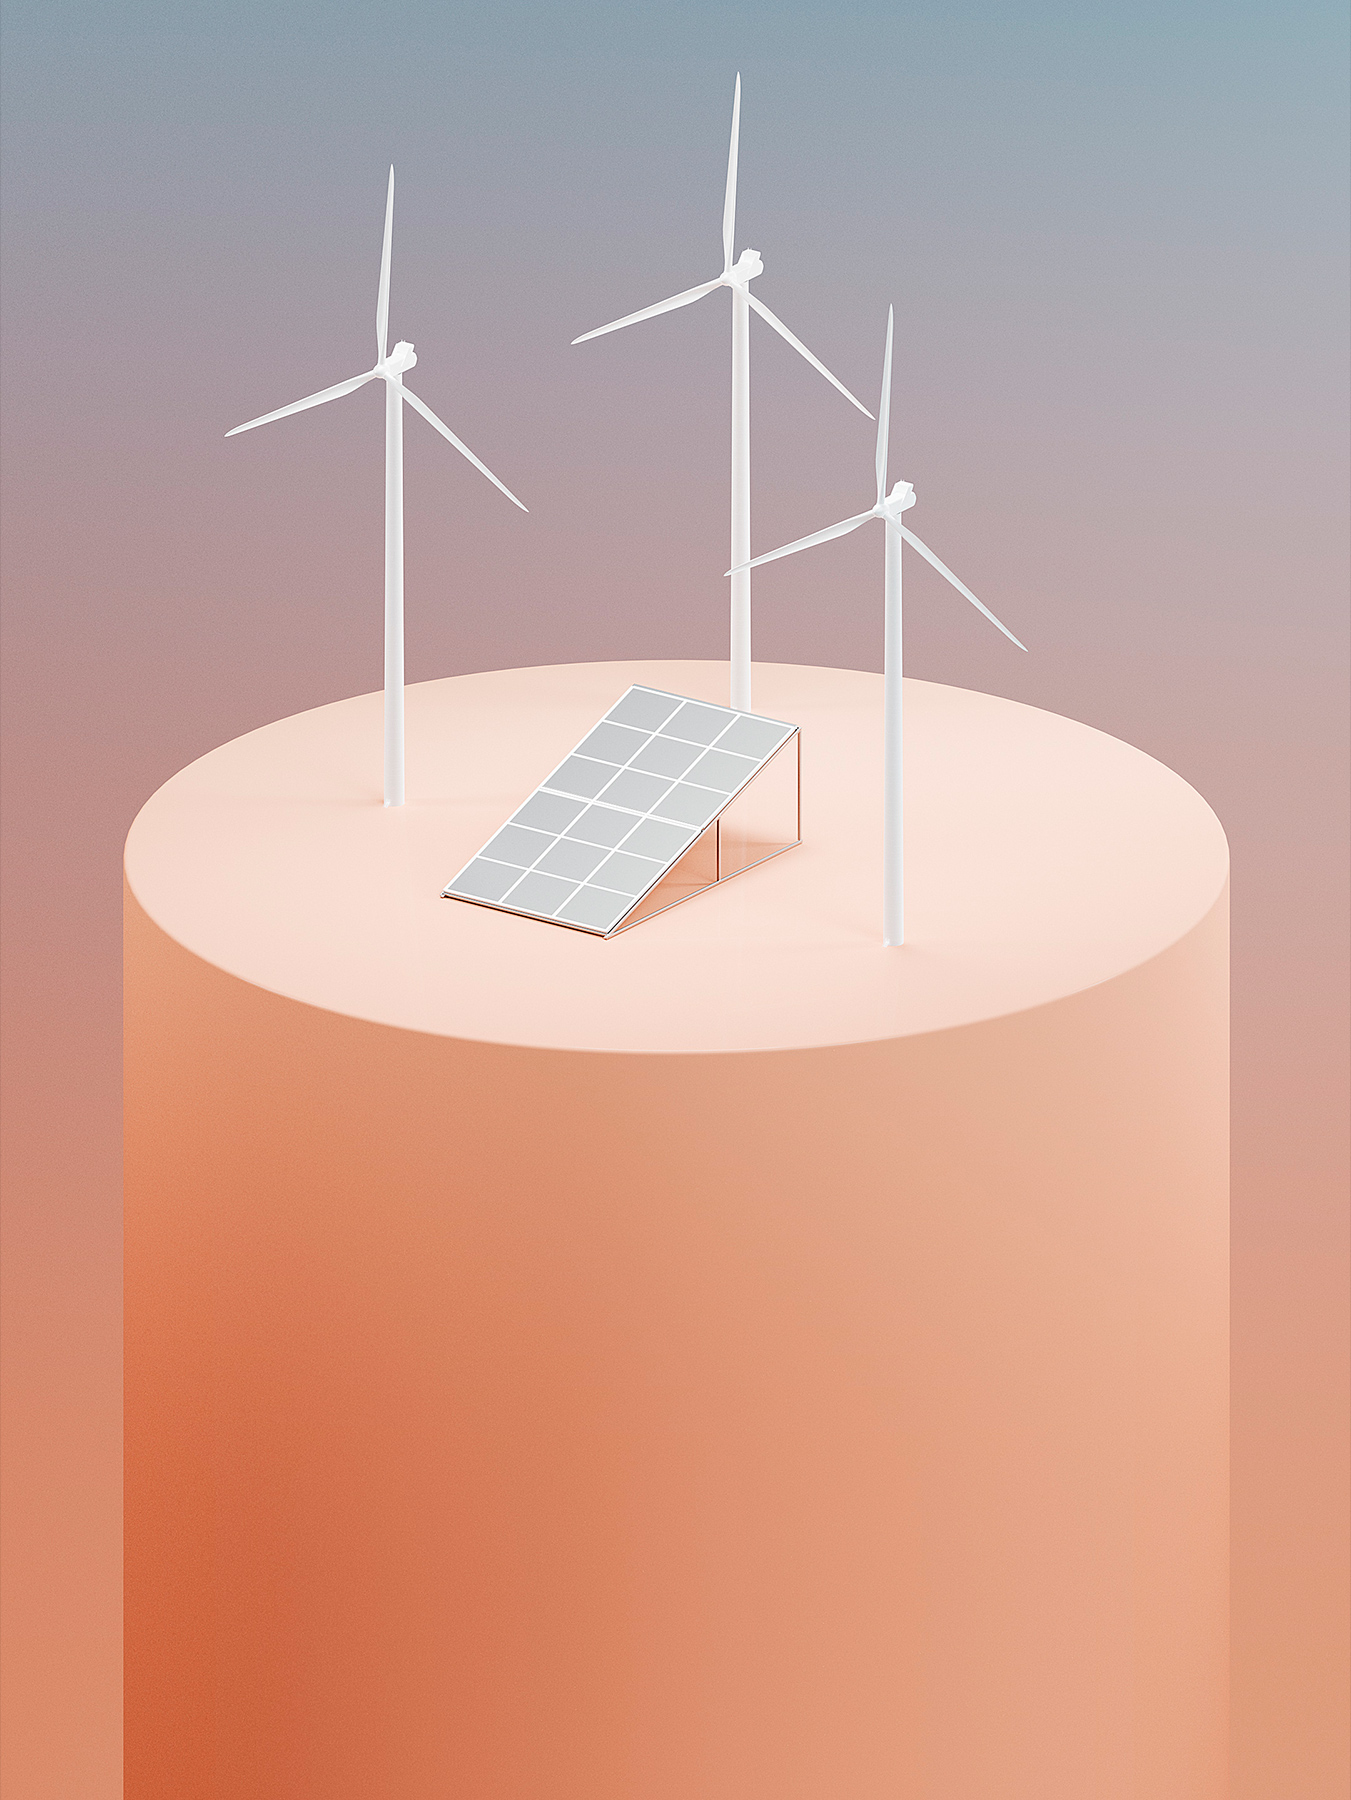 Renewable energy from wind, solar, and hydro power.